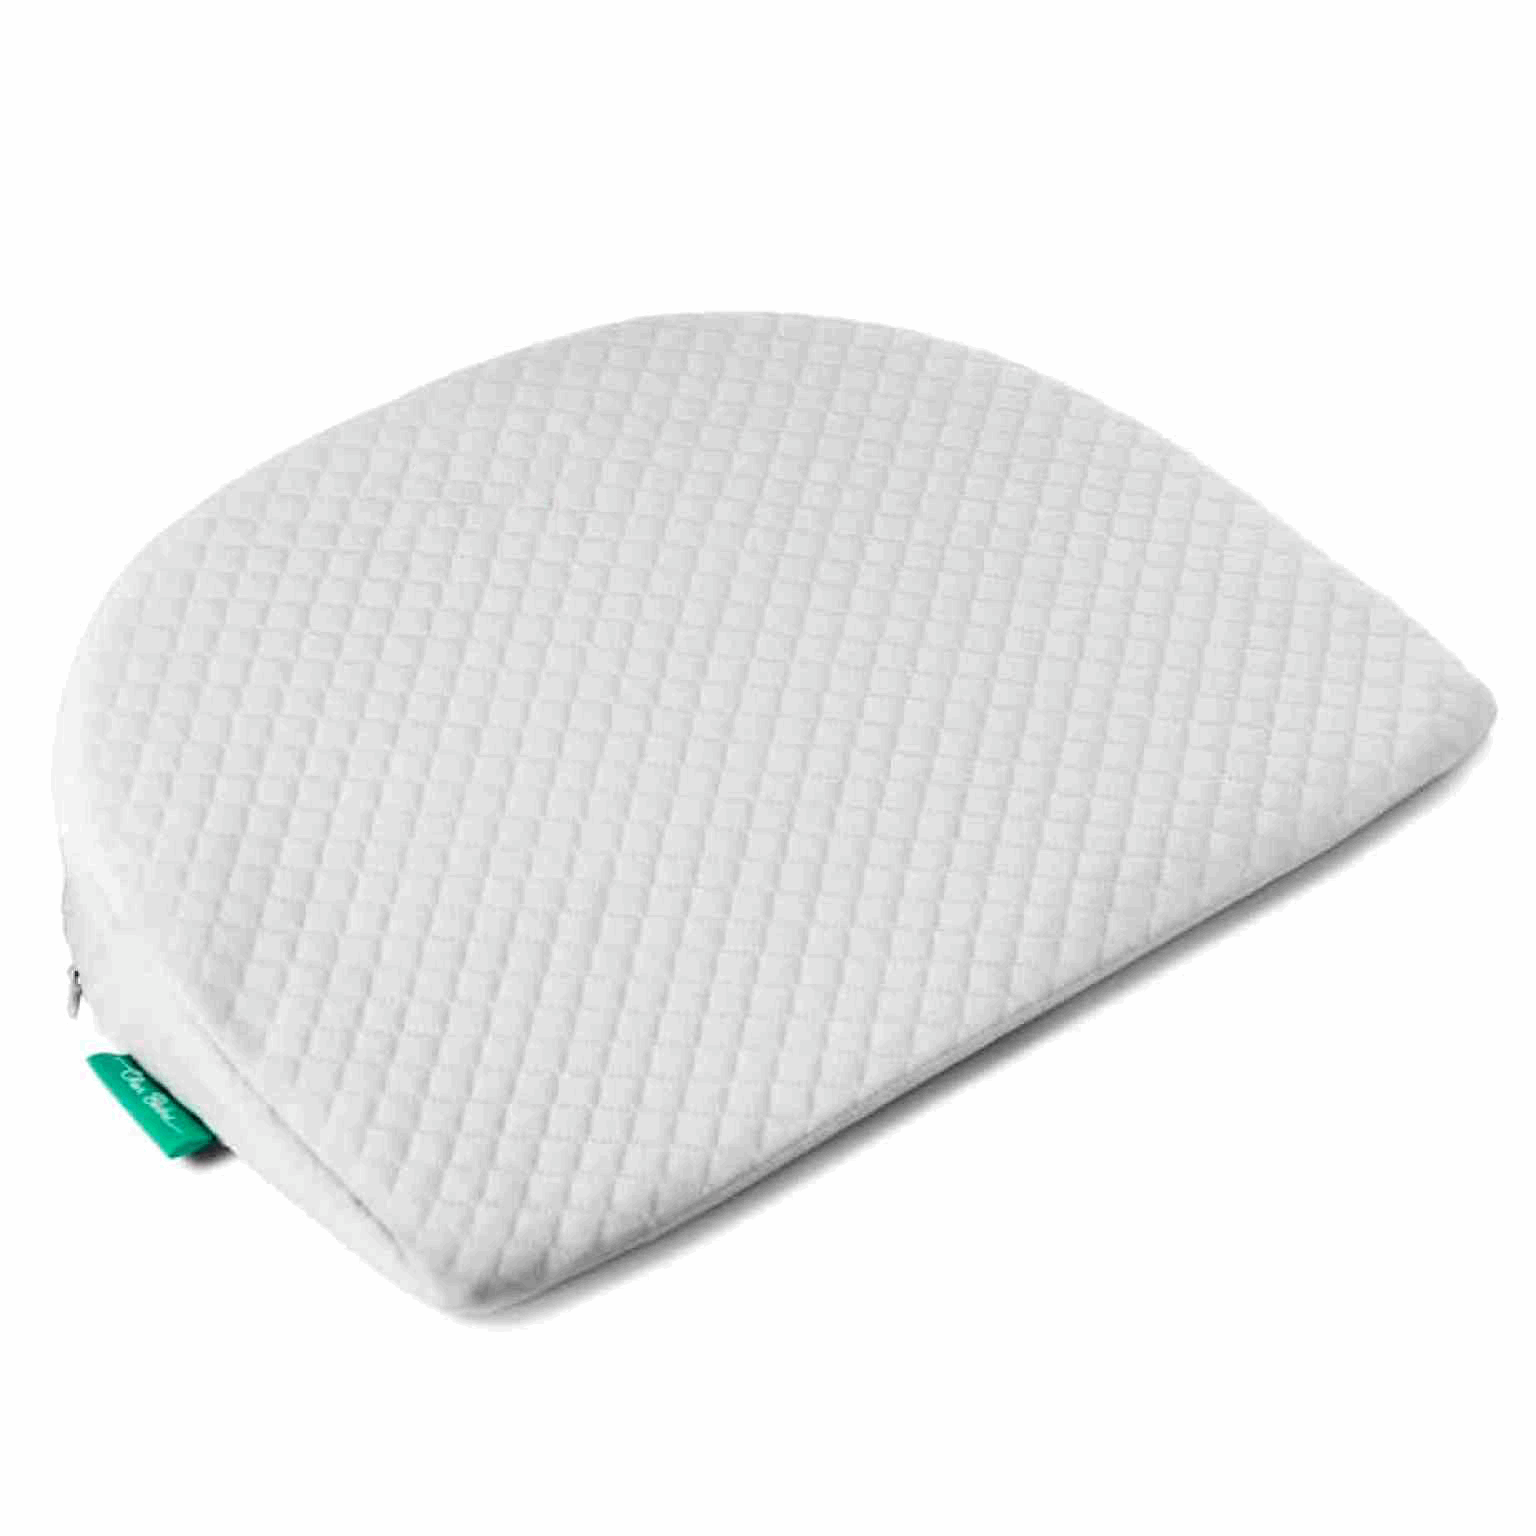 Crib Baby Wedge Pillow, Anti Acid Reflux Pillow for Infant